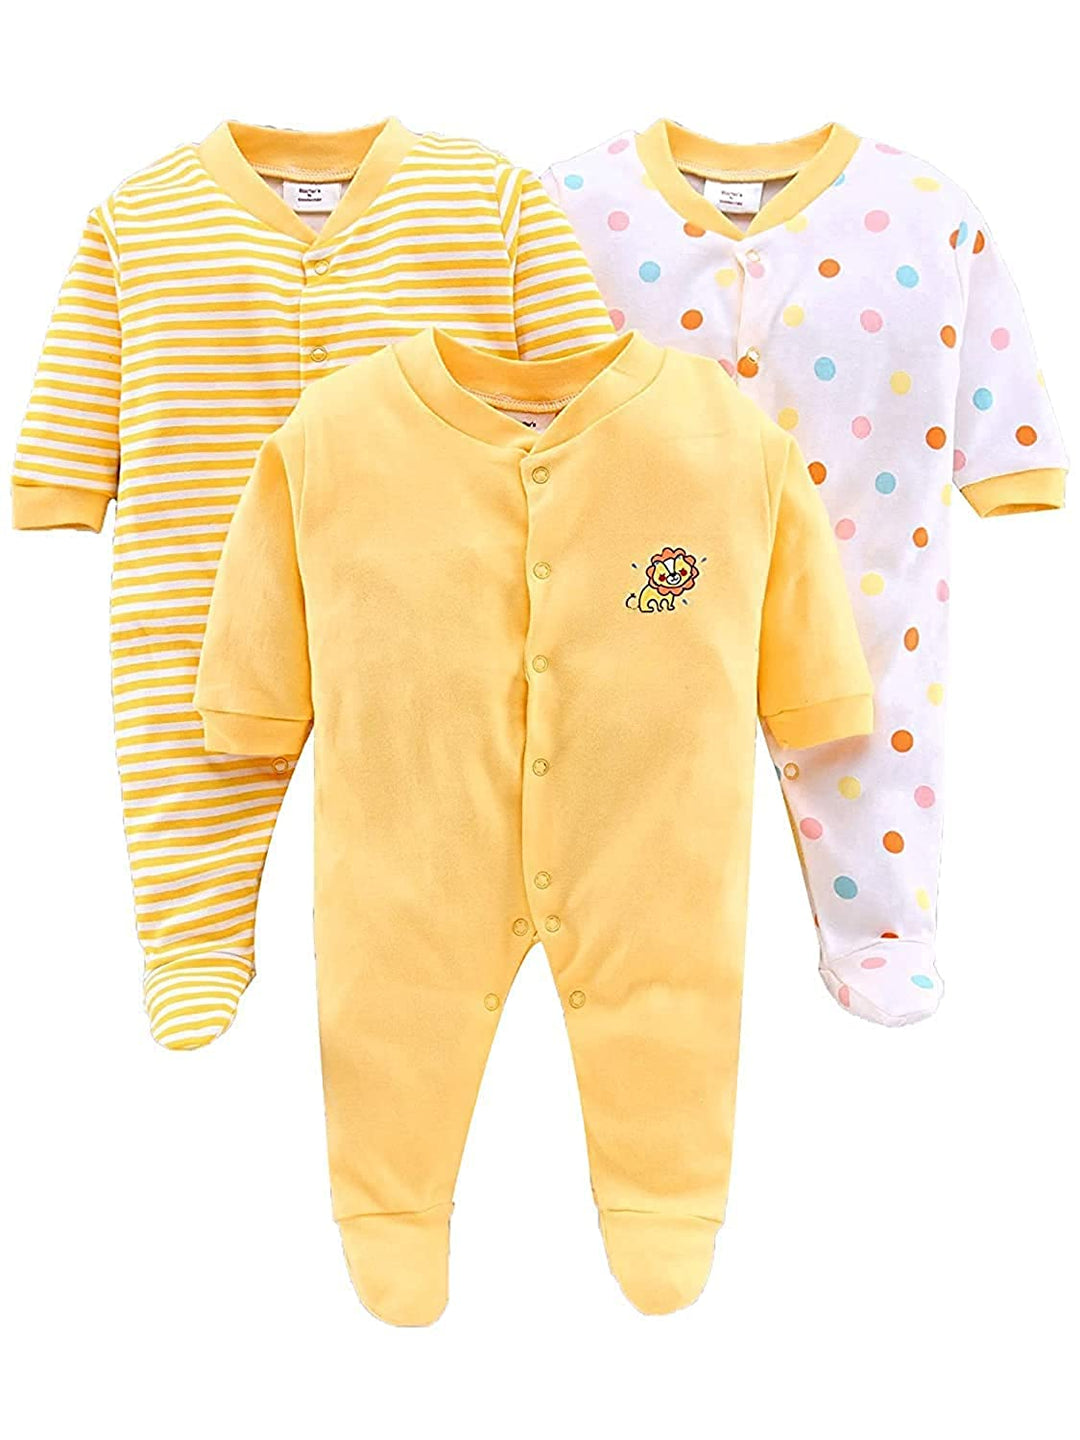 Cotton Full Sleeve Baby Bodysuits Romper for New Born Infant Rompers Sleep Suit for Baby Boys and Baby Girls Footies for Babies Prints Color May Vary Combo Pack of 3